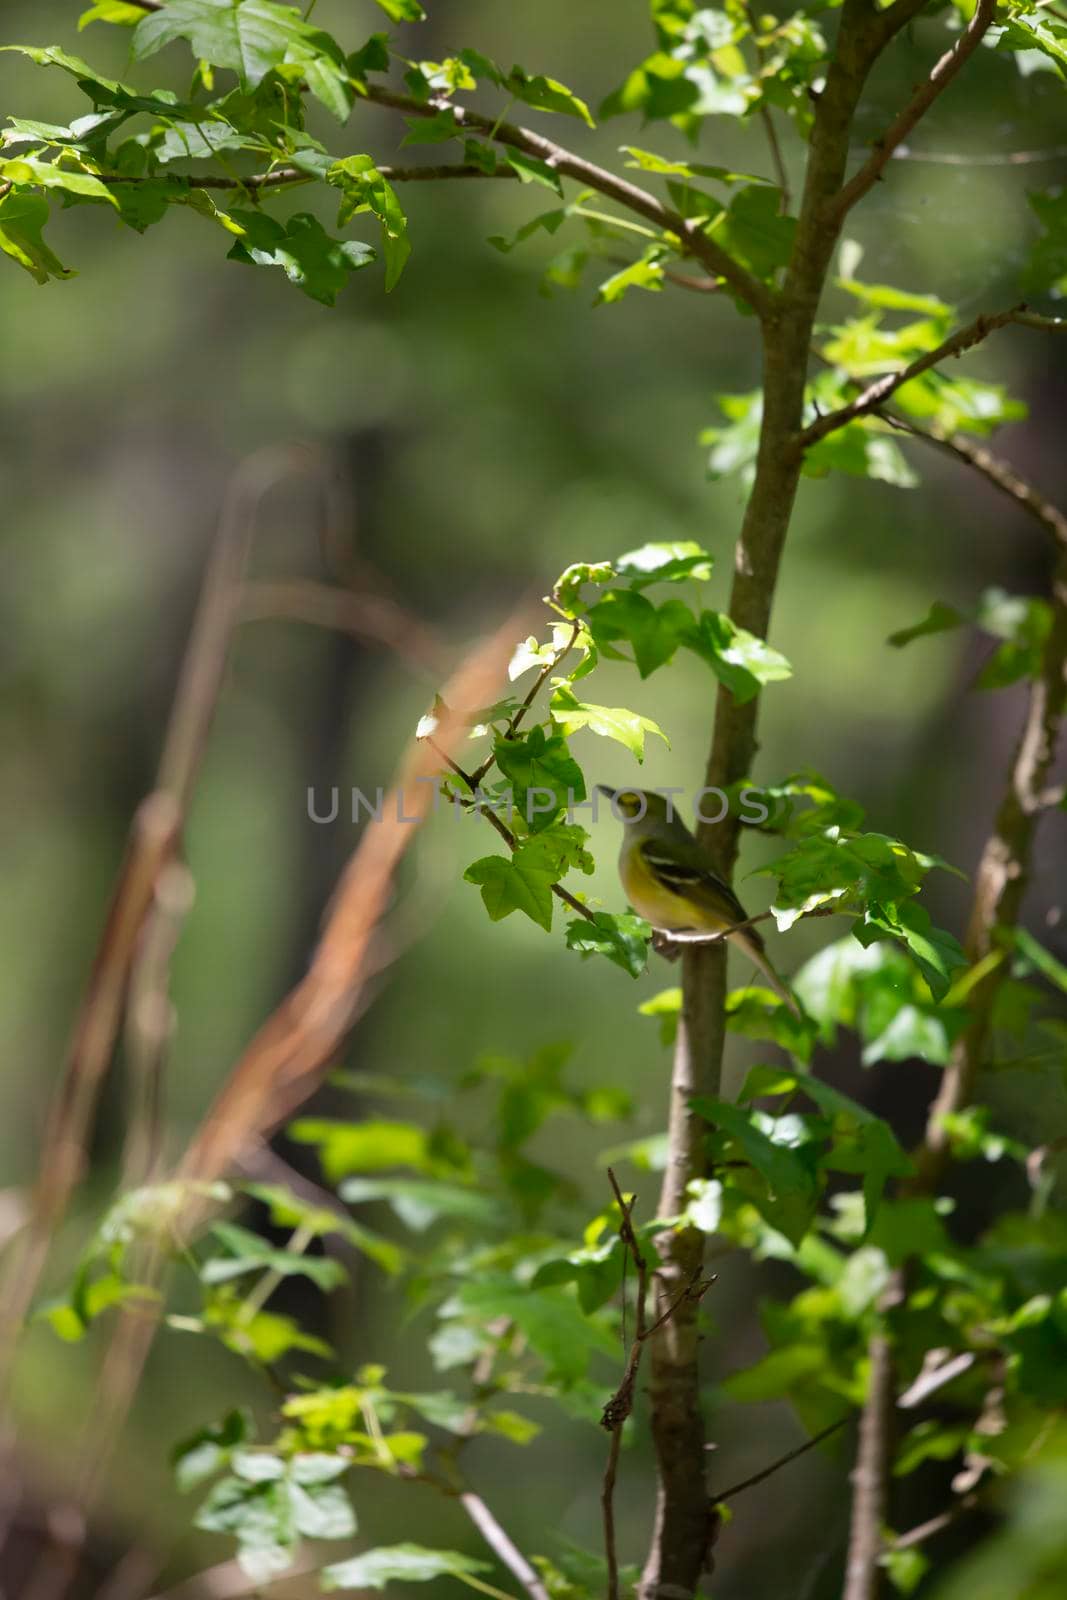 White-eyed vireo bird (Vireo griseus) perched on a bush branch